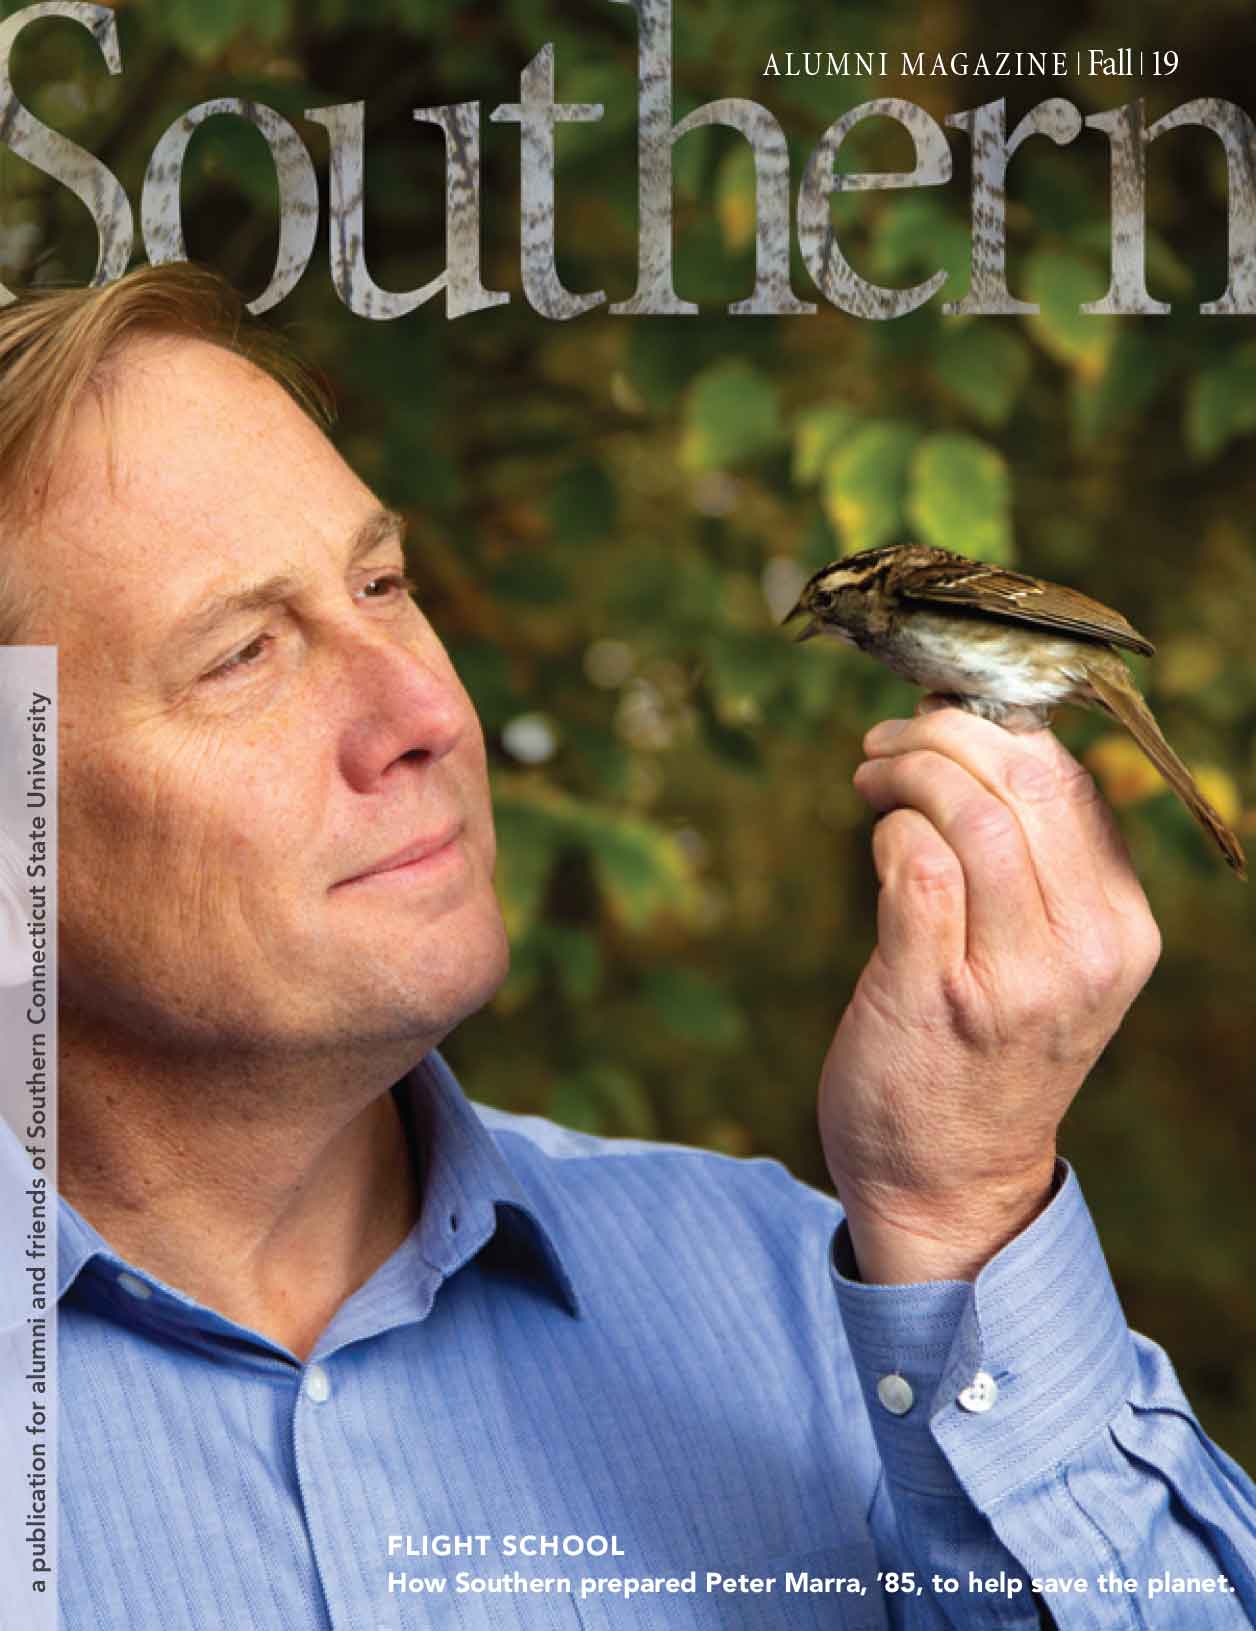 Southern Alumni Magazine cover, Fall 2019, featuring Peter Marra, '85